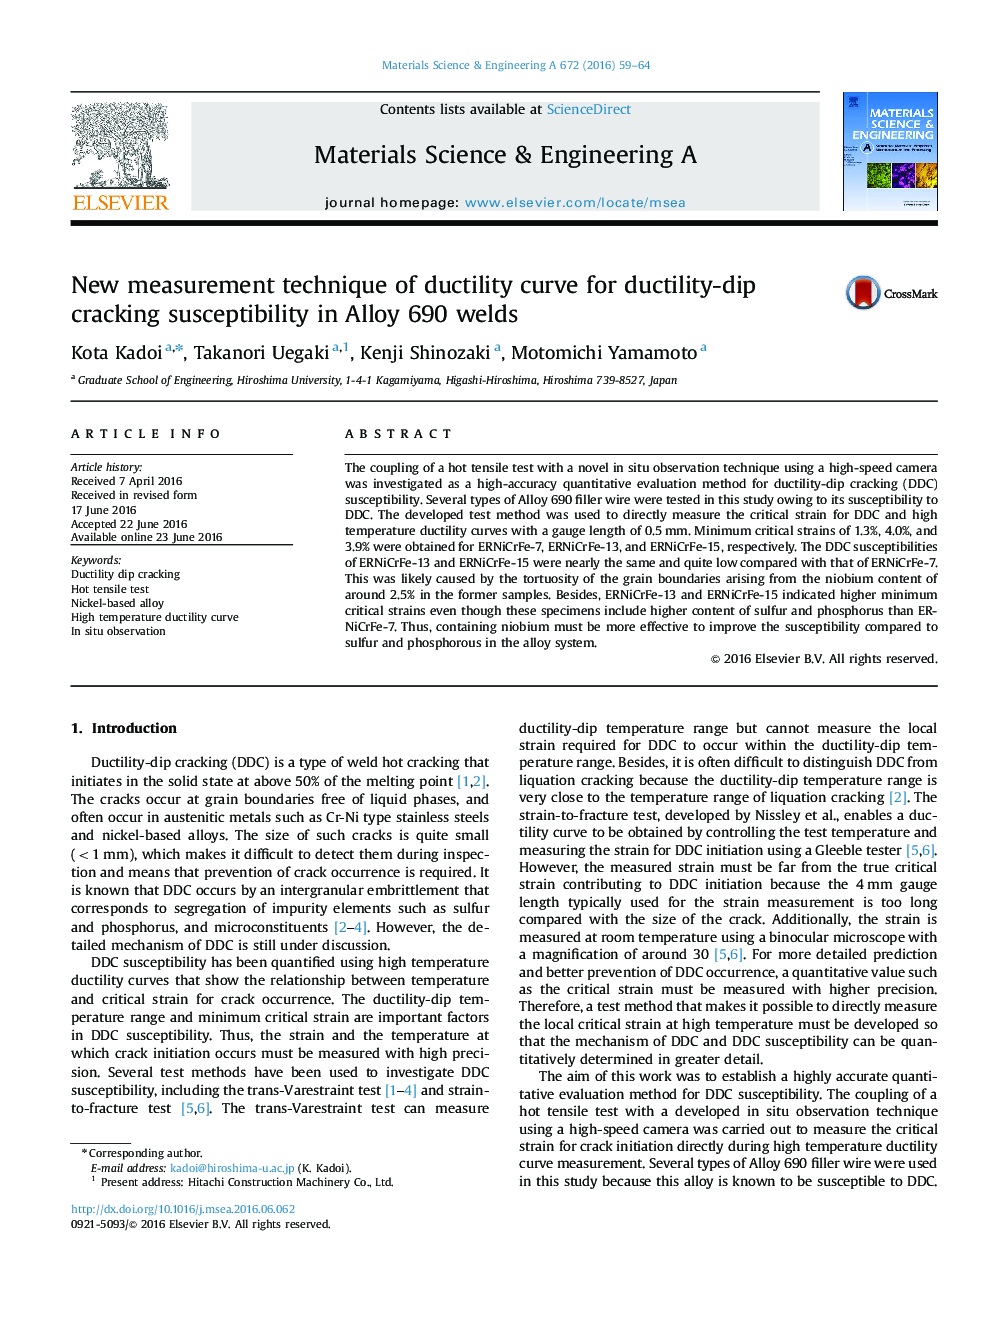 New measurement technique of ductility curve for ductility-dip cracking susceptibility in Alloy 690 welds